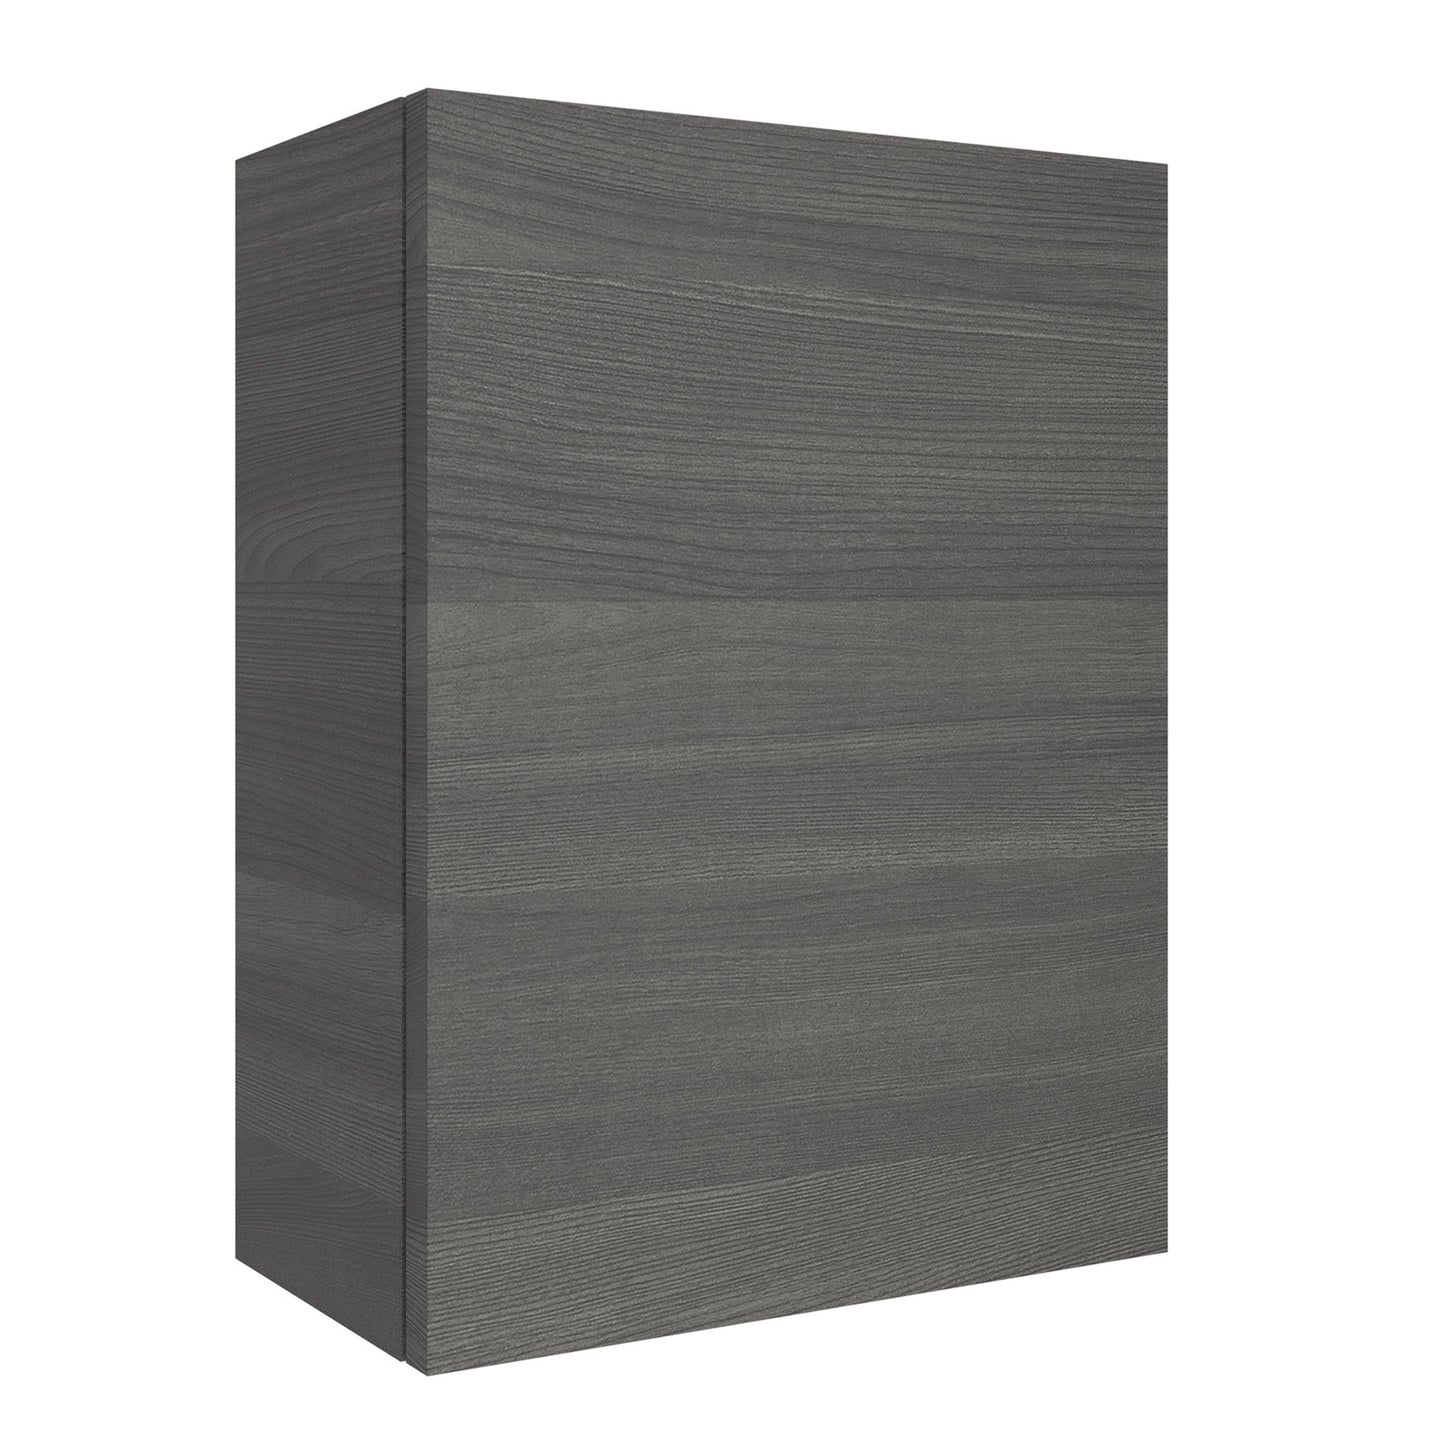 Wall hung storage unit 16 inches Alliance one door